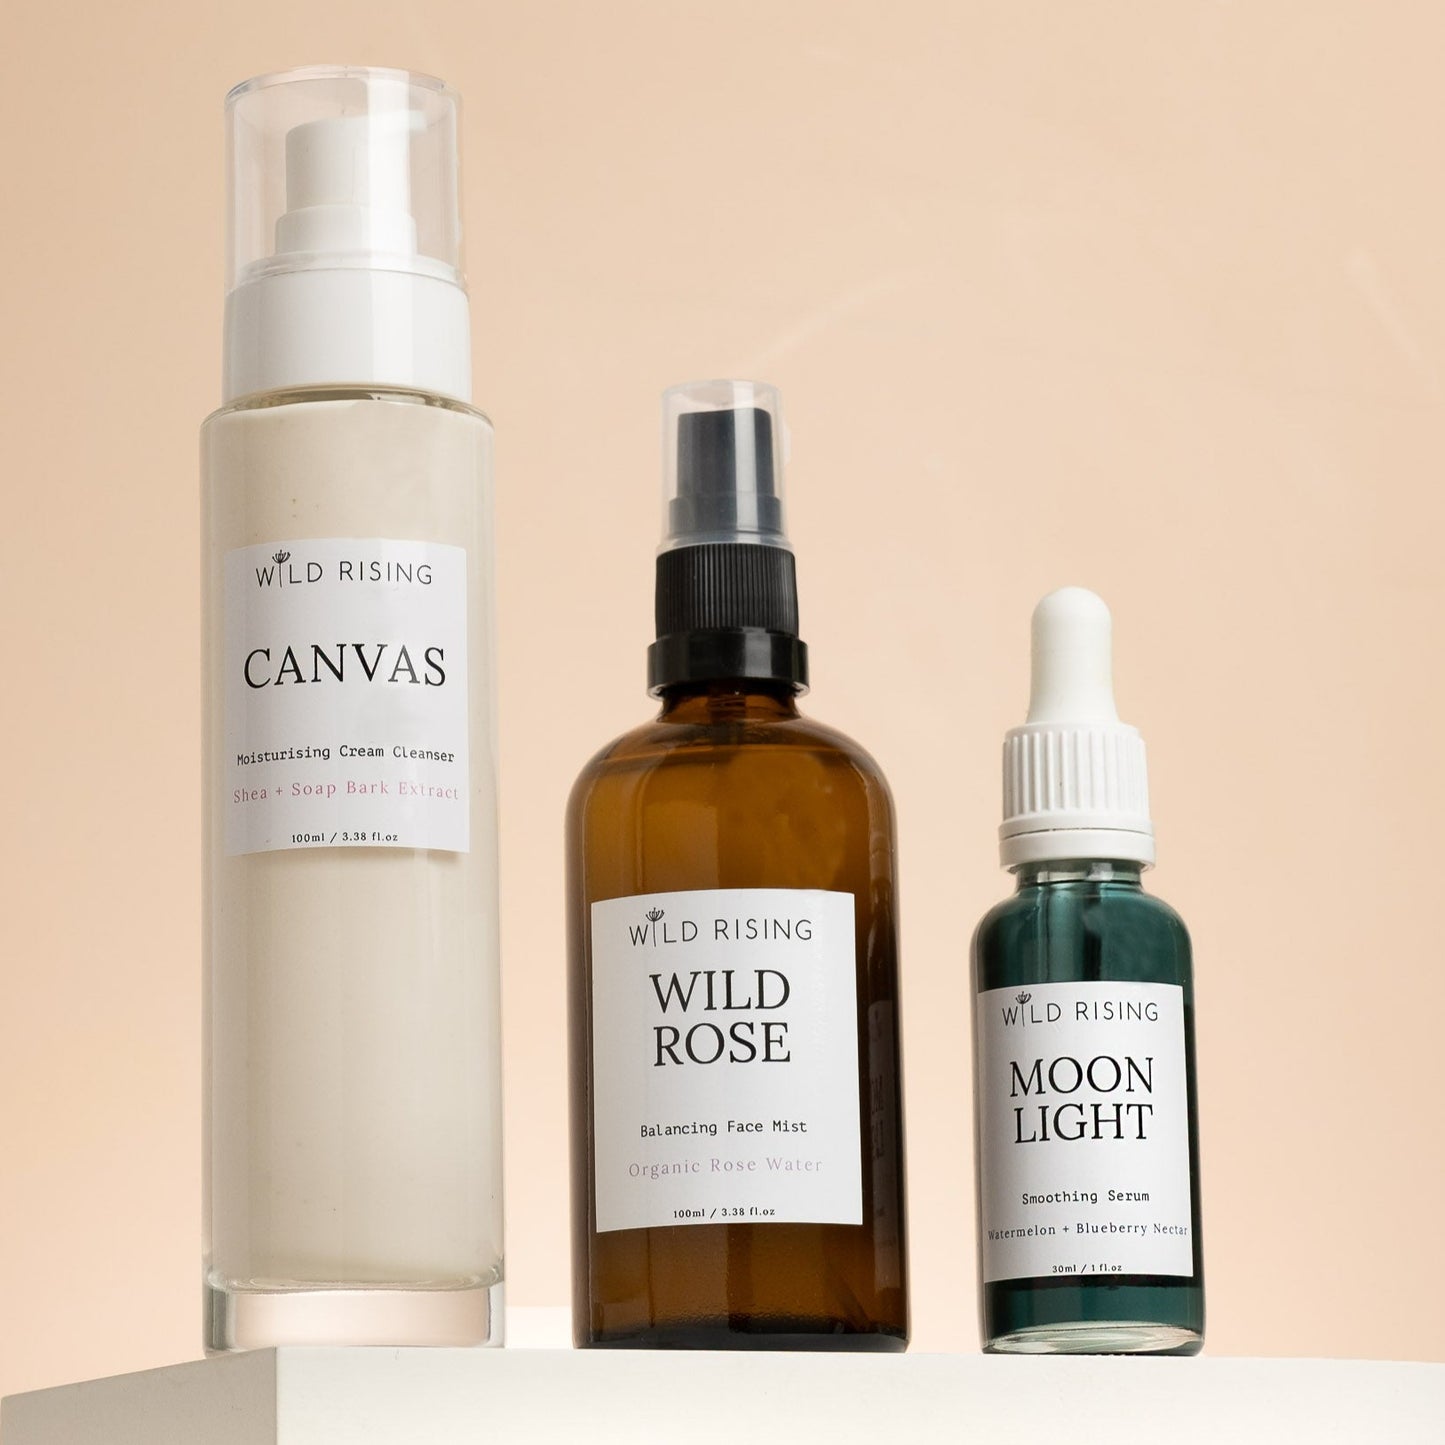 Canvas cream cleanser, wild rose organic rose water toner and moonlight blue tansy face oil stood together